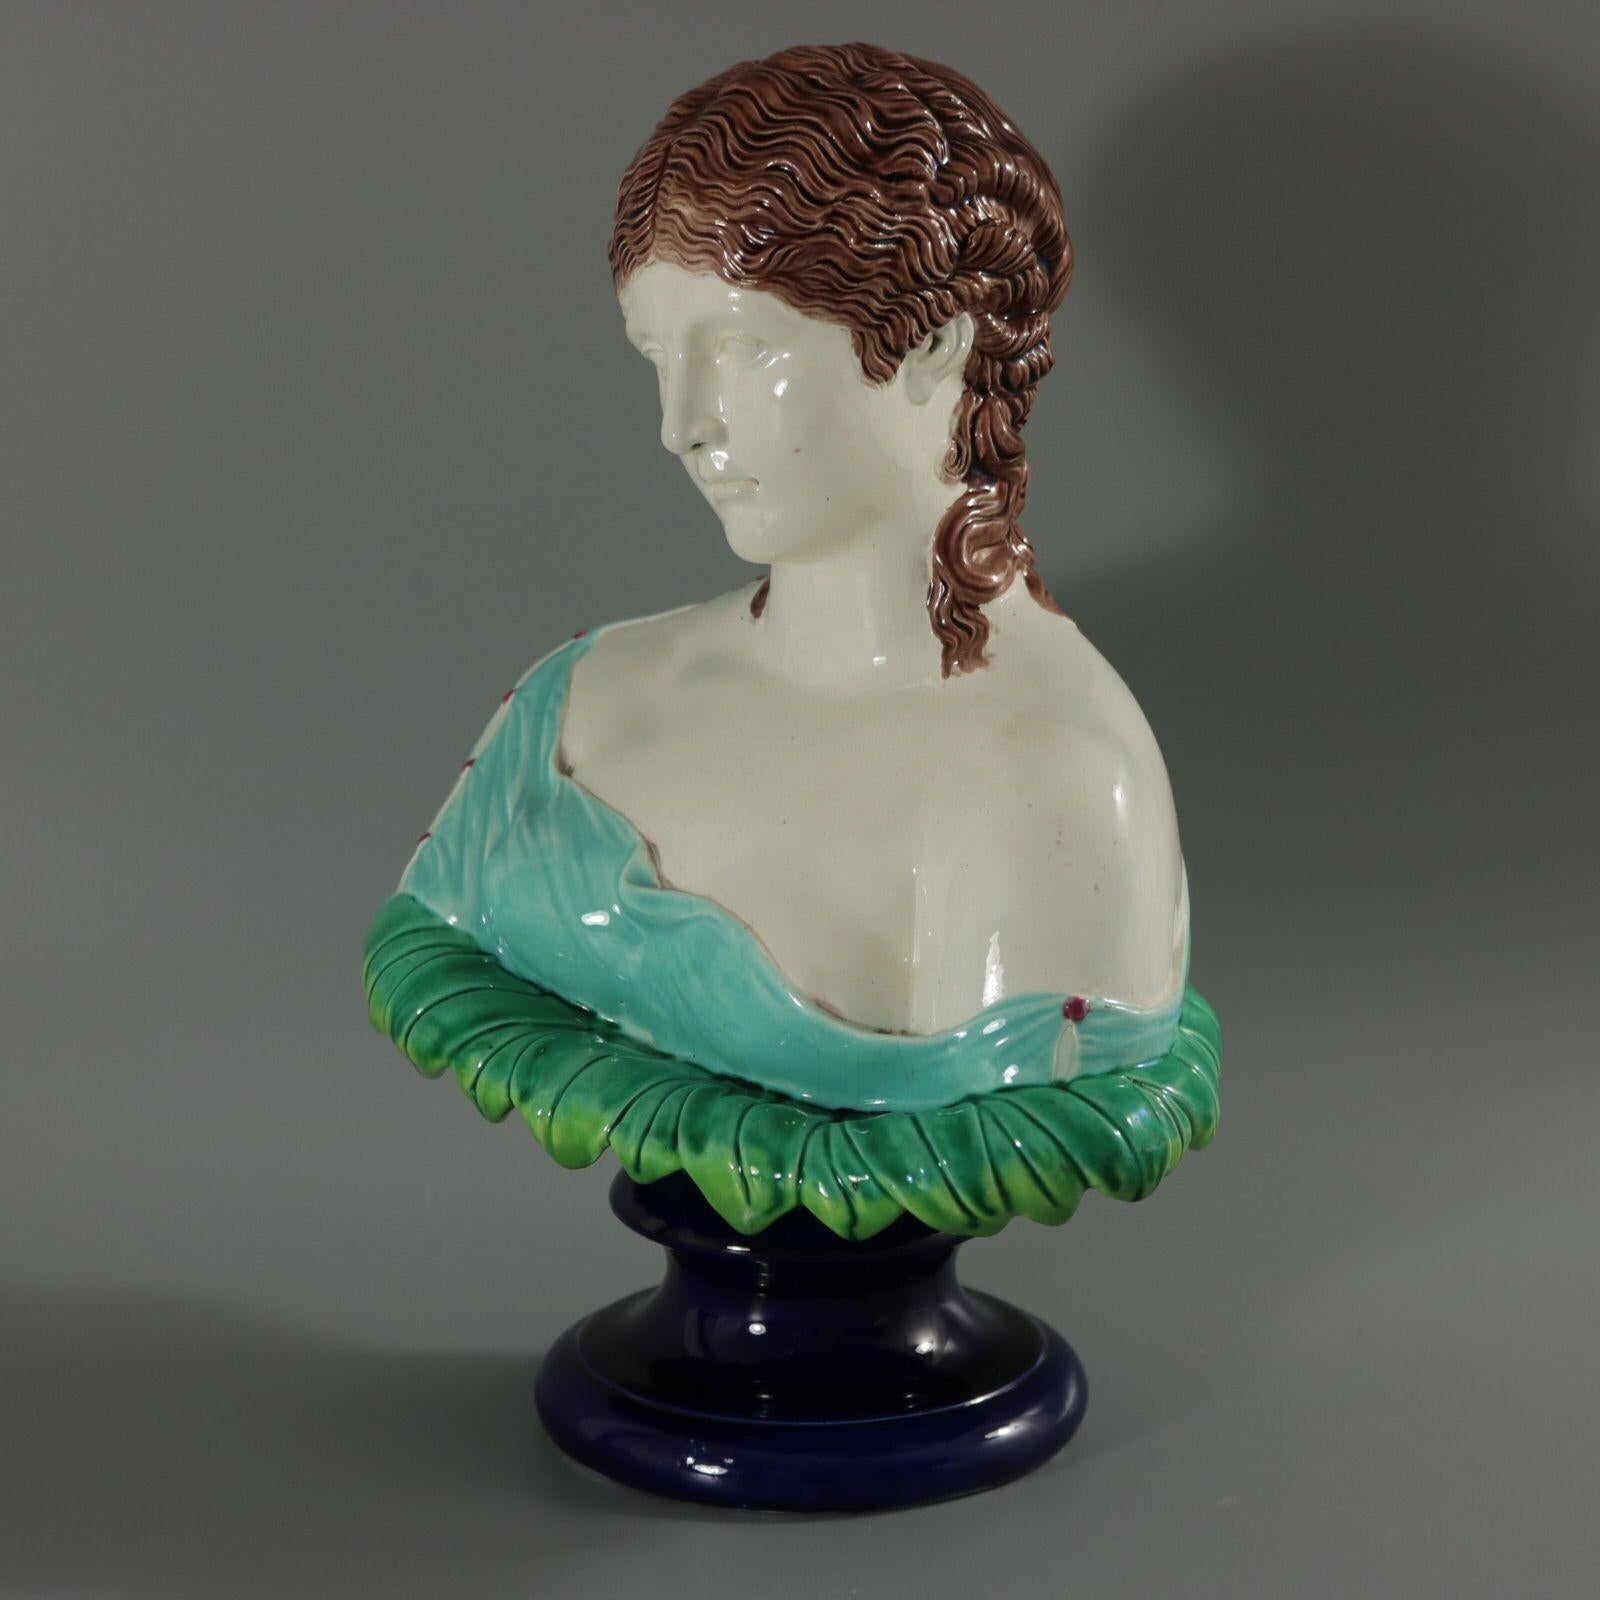 Copeland Majolica bust which features head and shoulders of a woman on a bed of leaves. Sits on a socle base. Colouration: white, turquoise, green, are predominant. This piece represents Clytie the water nymph, daughter of the Titans Oceanus and